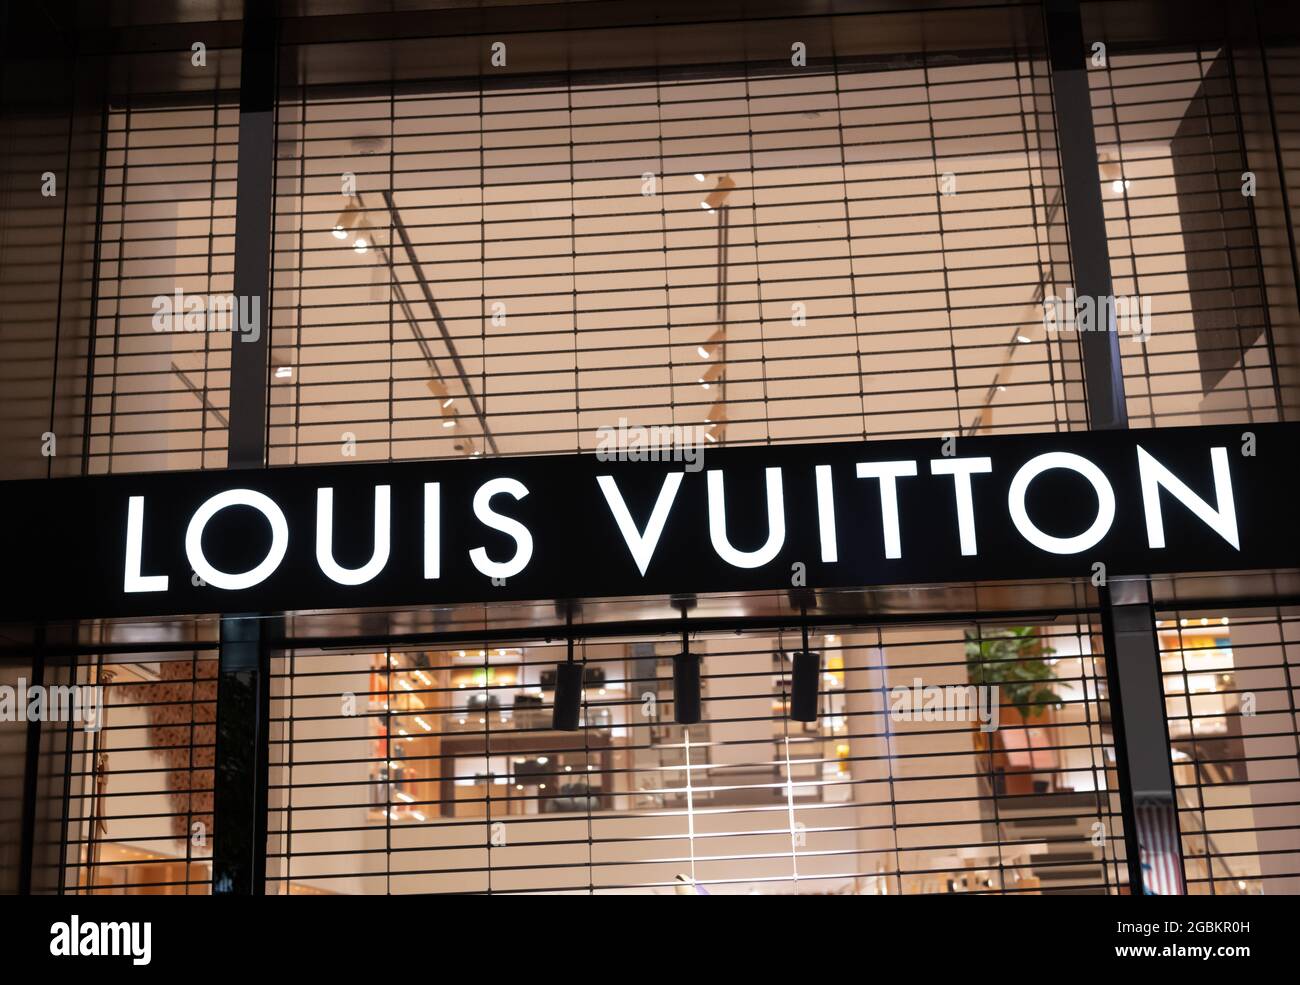 Miami, USA - March 20, 2021: Louis Vuitton night storefront at